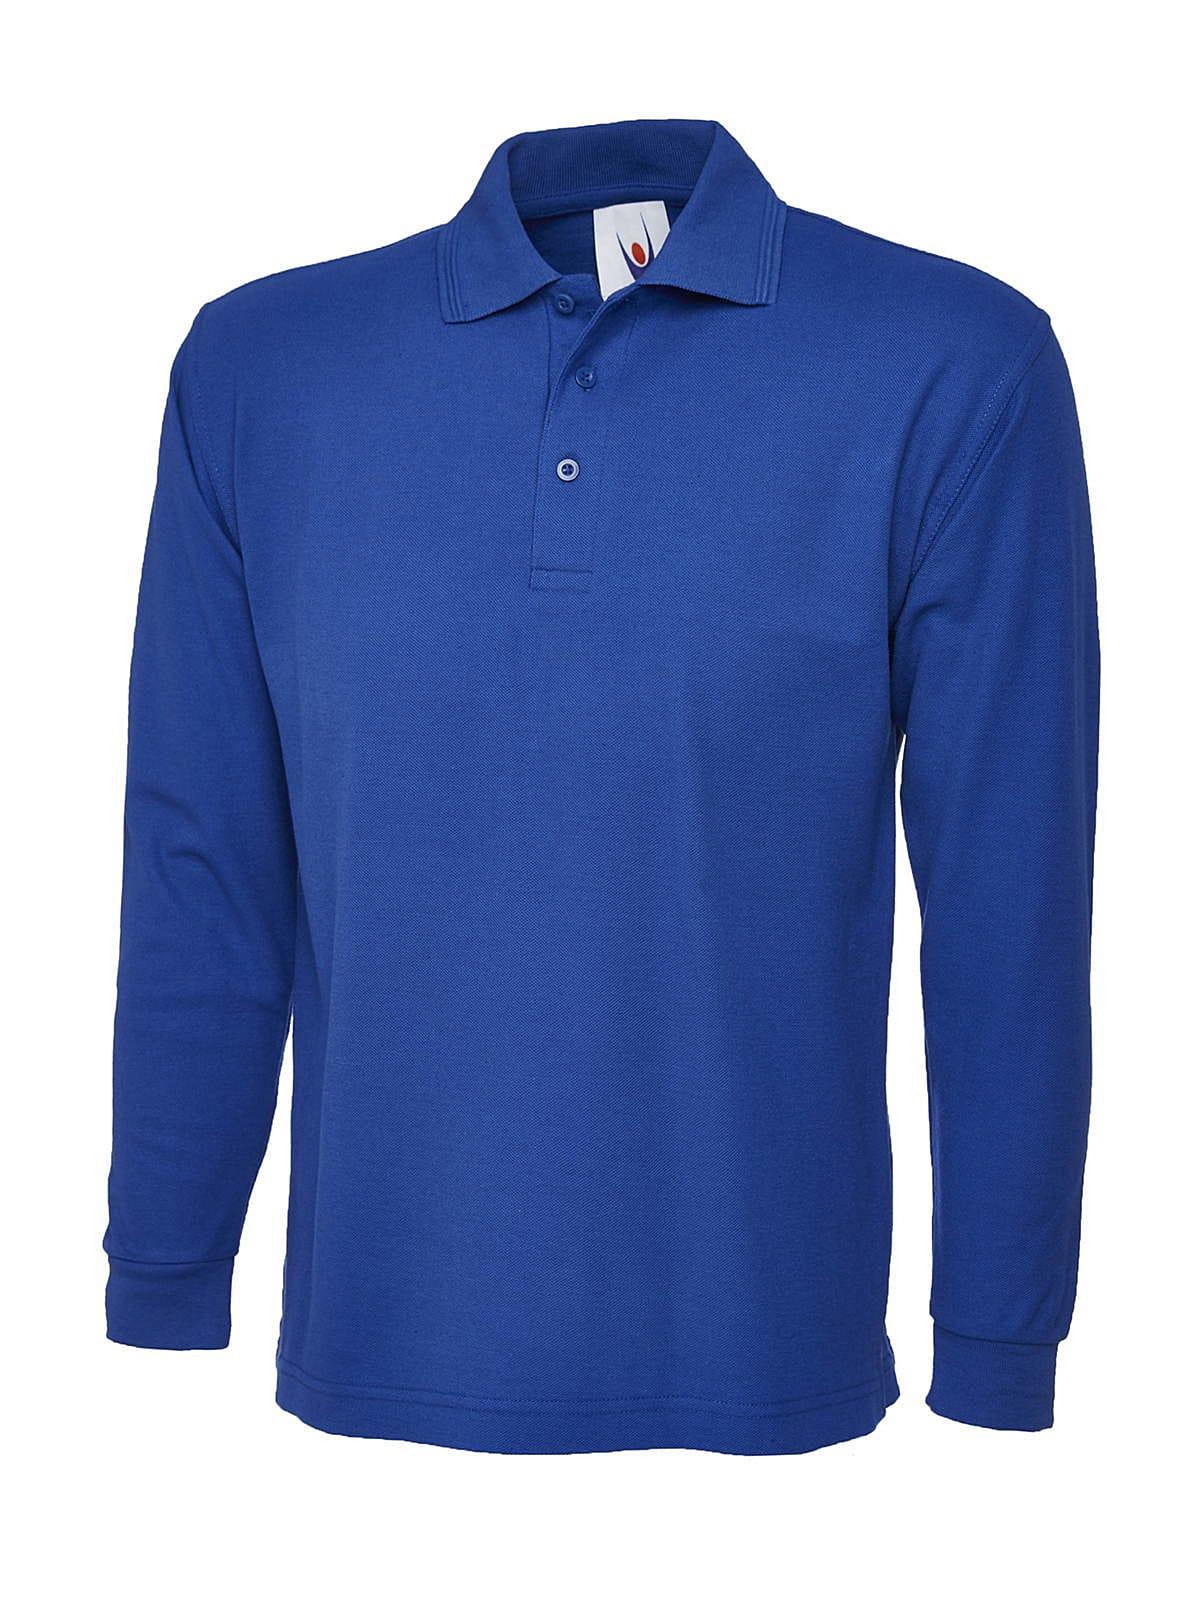 Uneek 220GSM Long-Sleeve Polo Shirt in Royal Blue (Product Code: UC113)